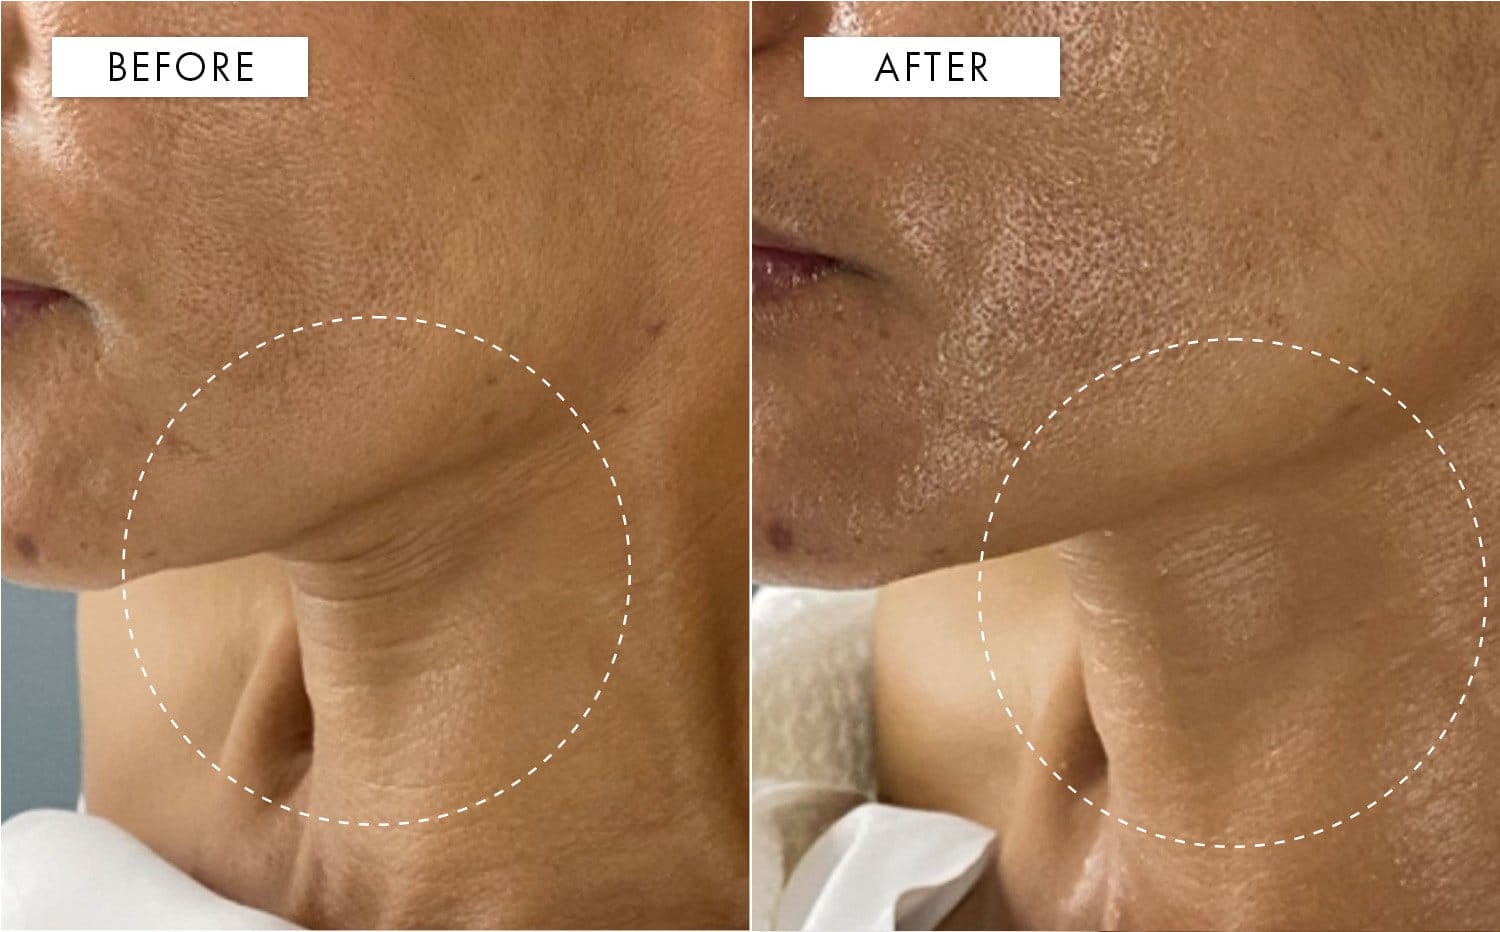 Impactful before & after results